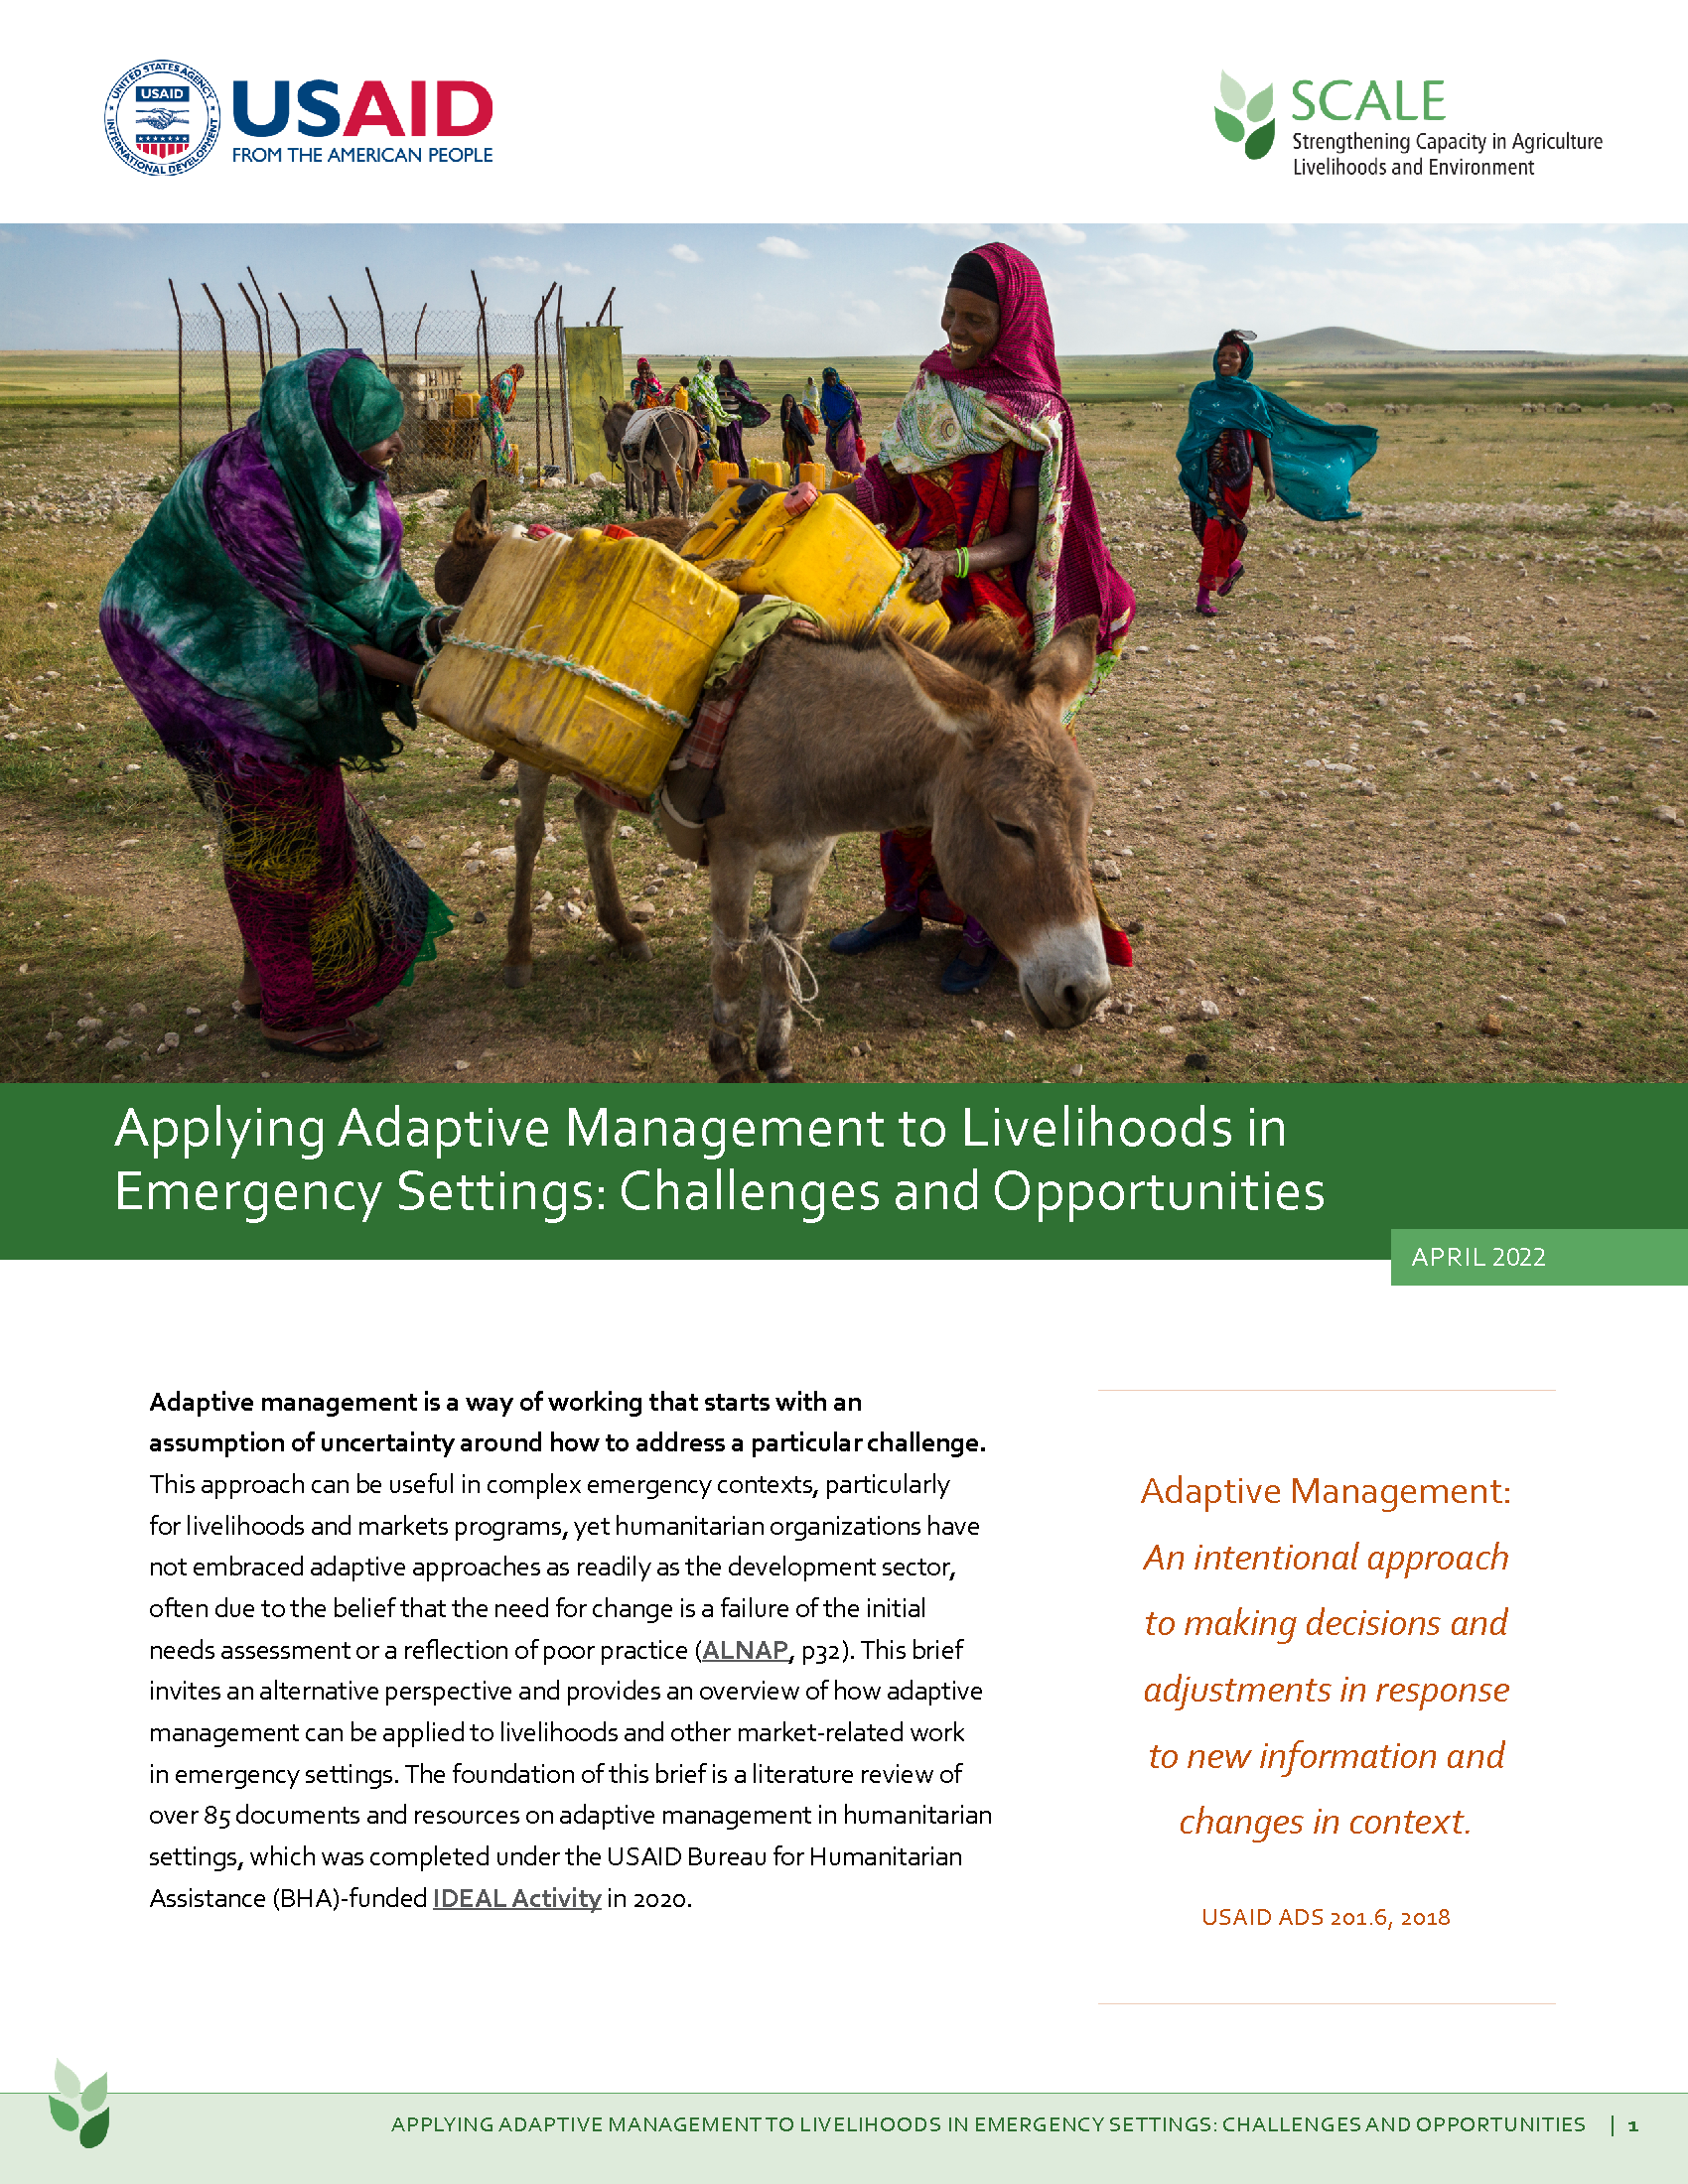 Cover page for Applying Adaptive Management to Livelihoods in Emergency Settings: Challenges and Opportunities